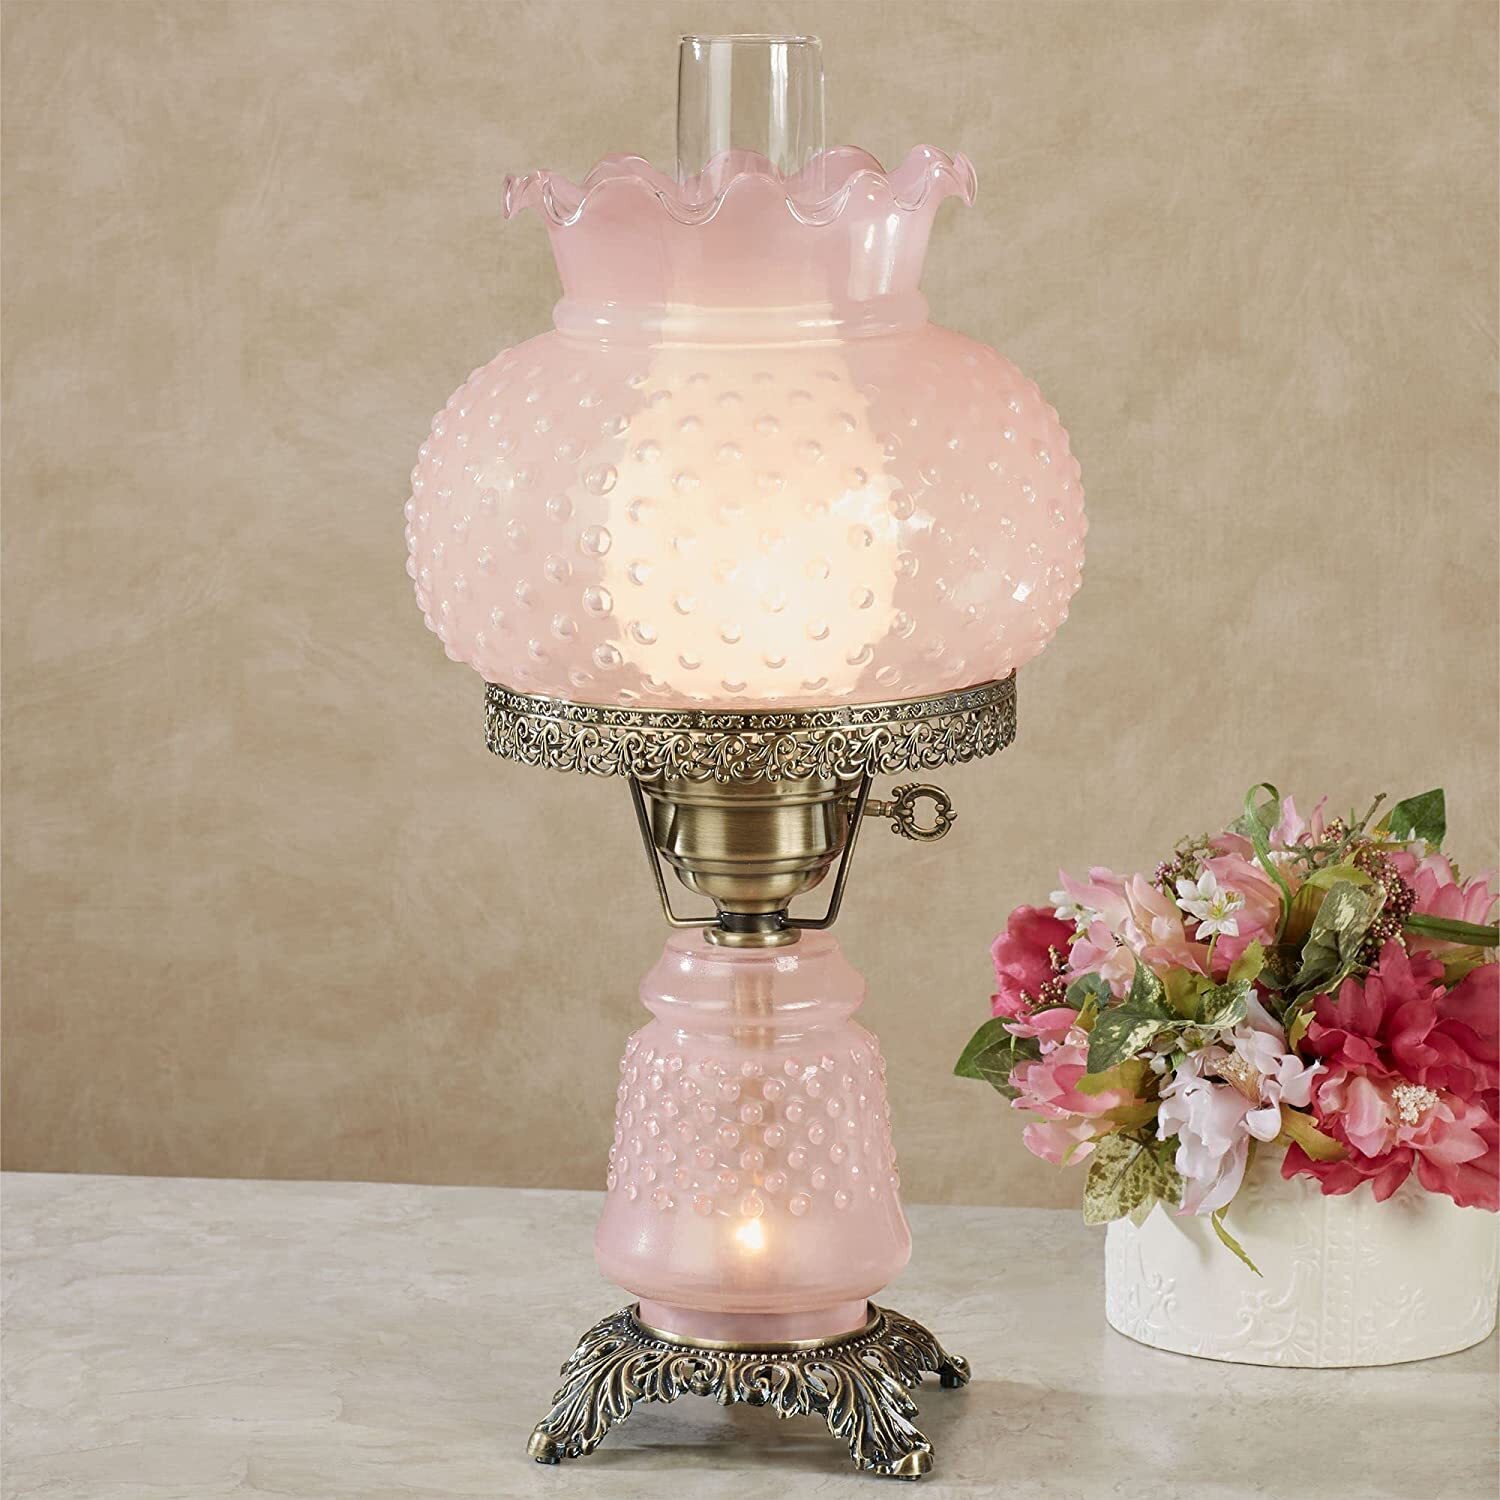 Frosted vintage double globe table lamp